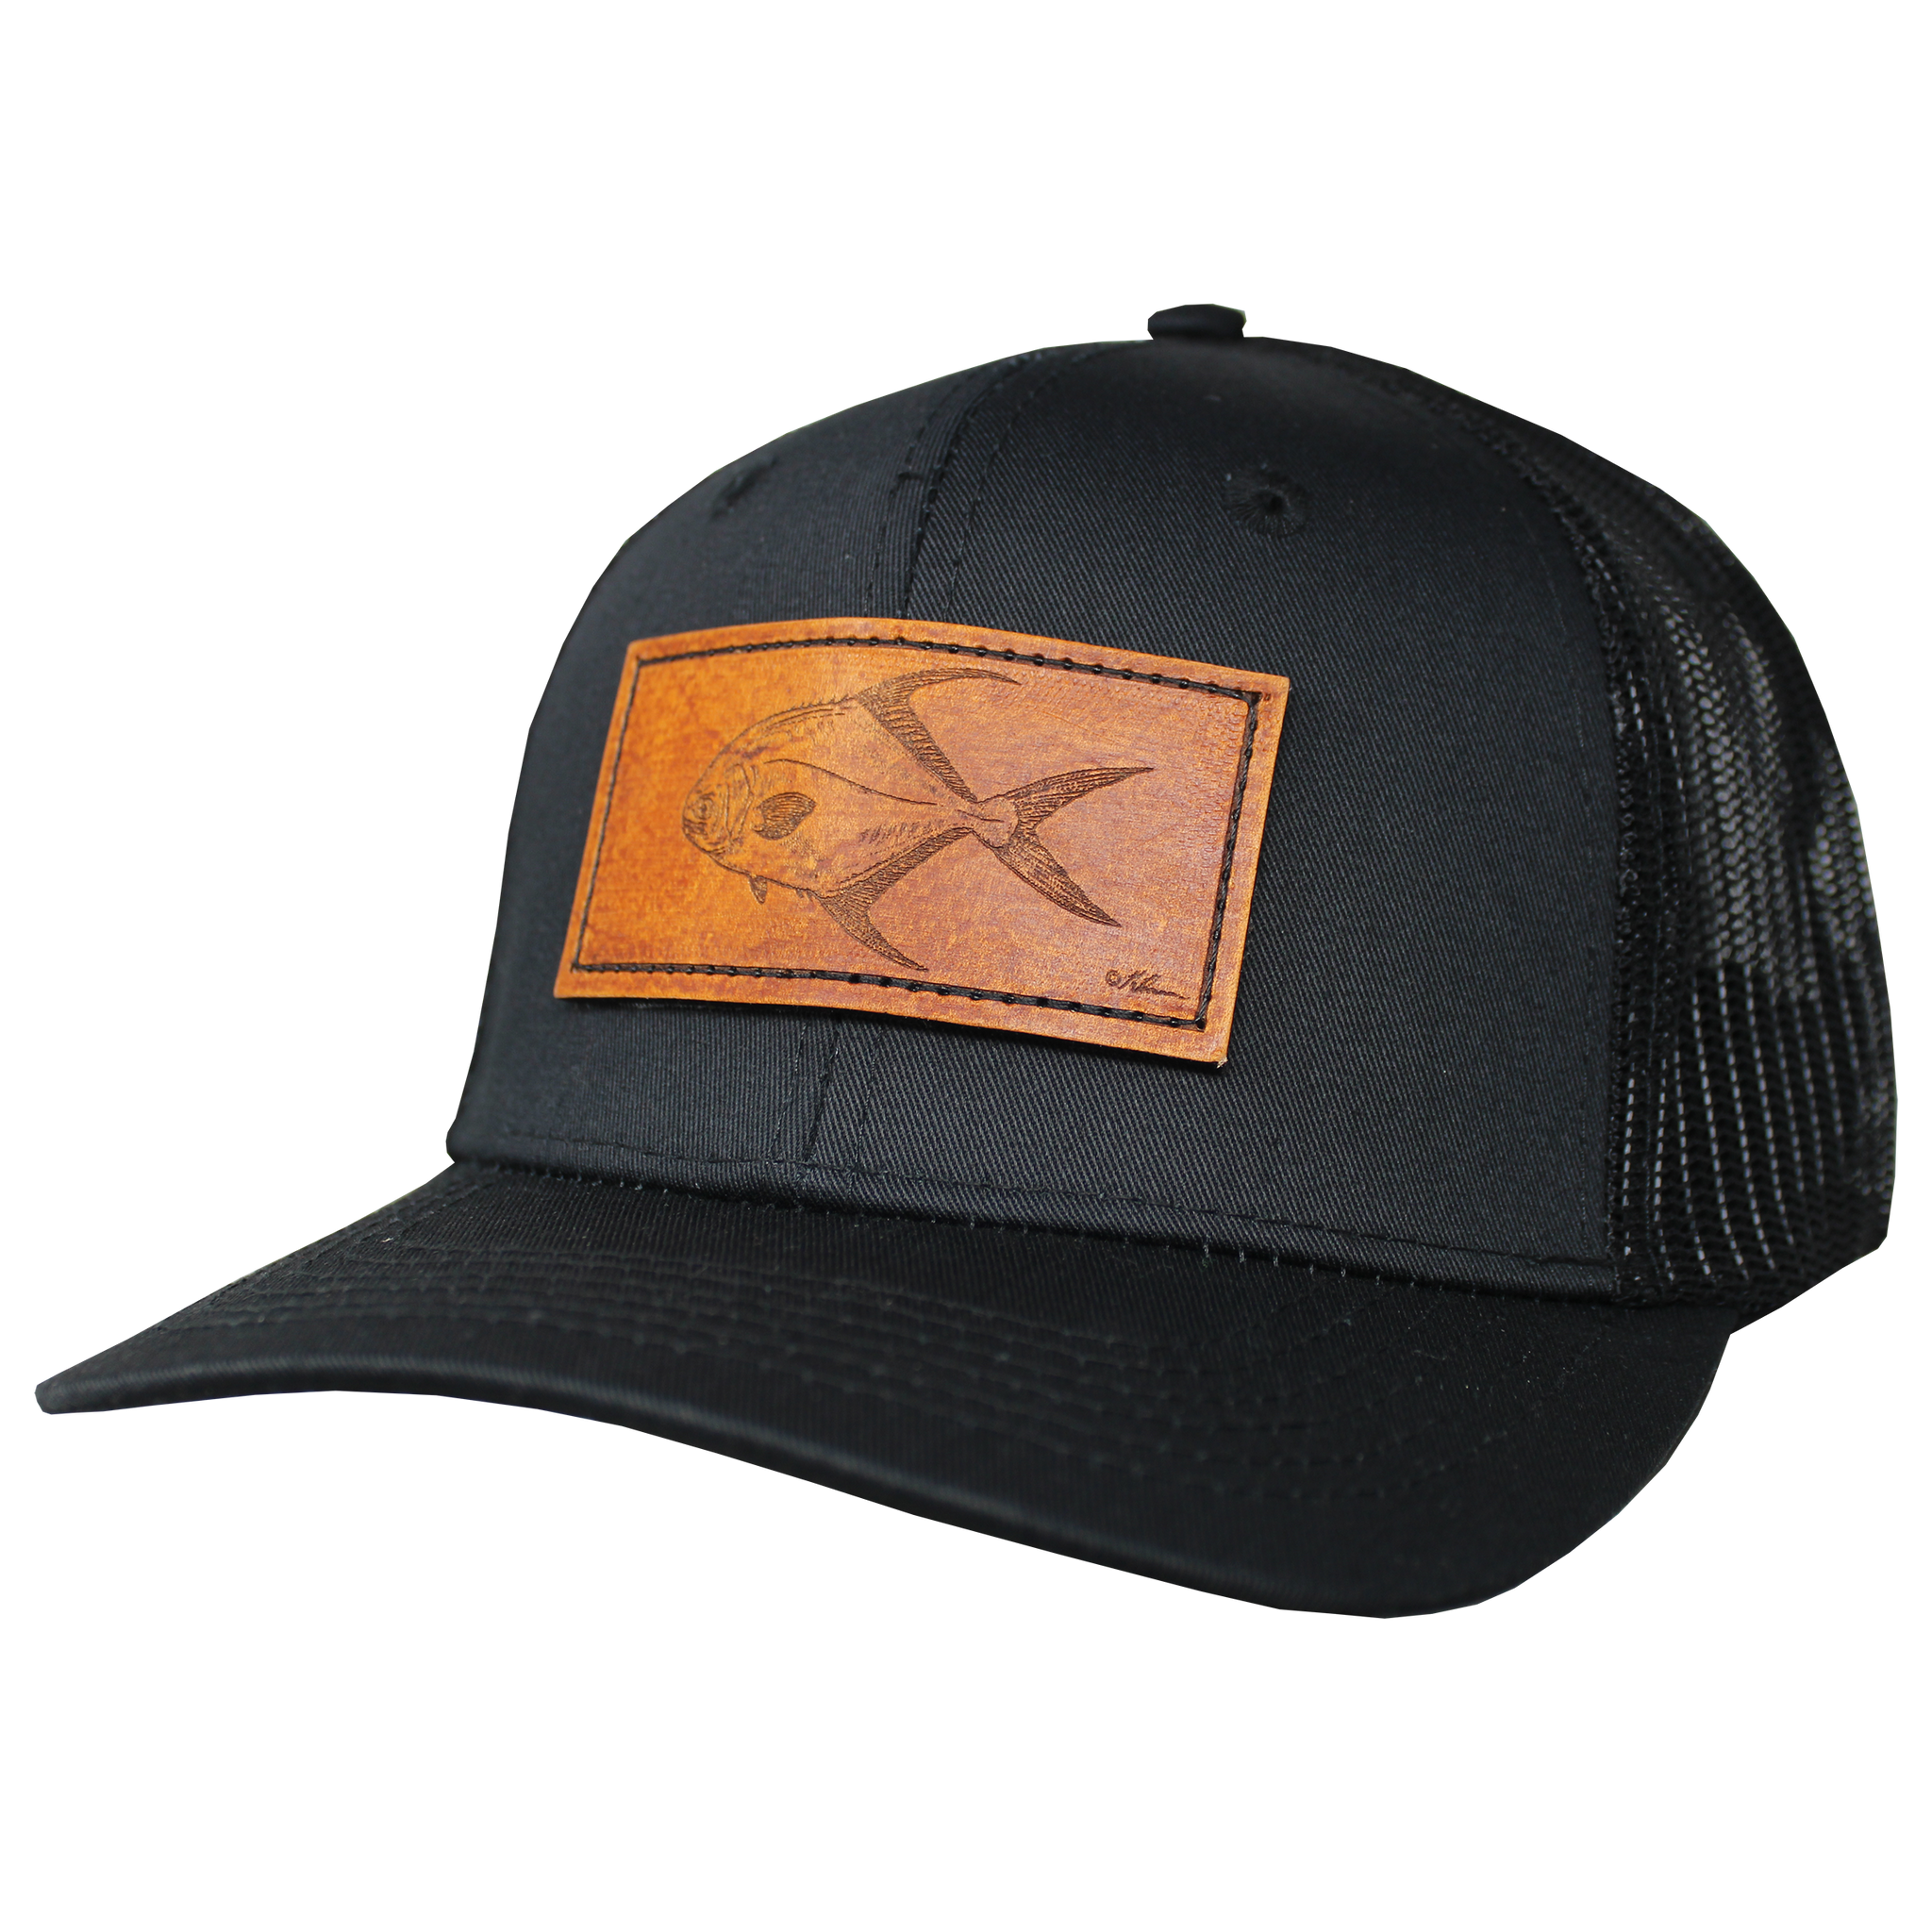 Trucker Performance Cap - Permit Leather Patch